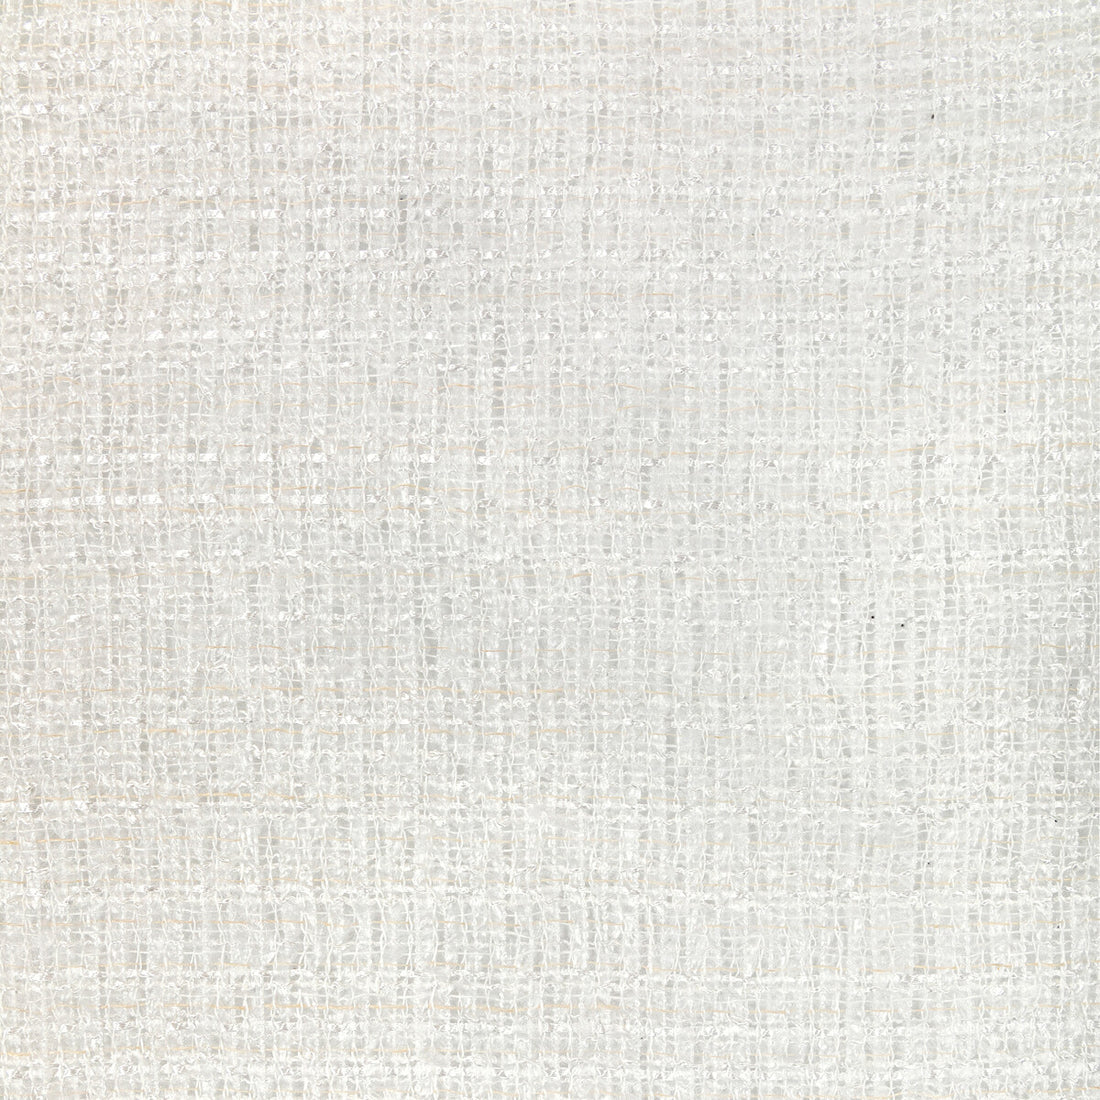 Soft Spoken fabric in ivory color - pattern 4889.101.0 - by Kravet Couture in the Modern Luxe III collection